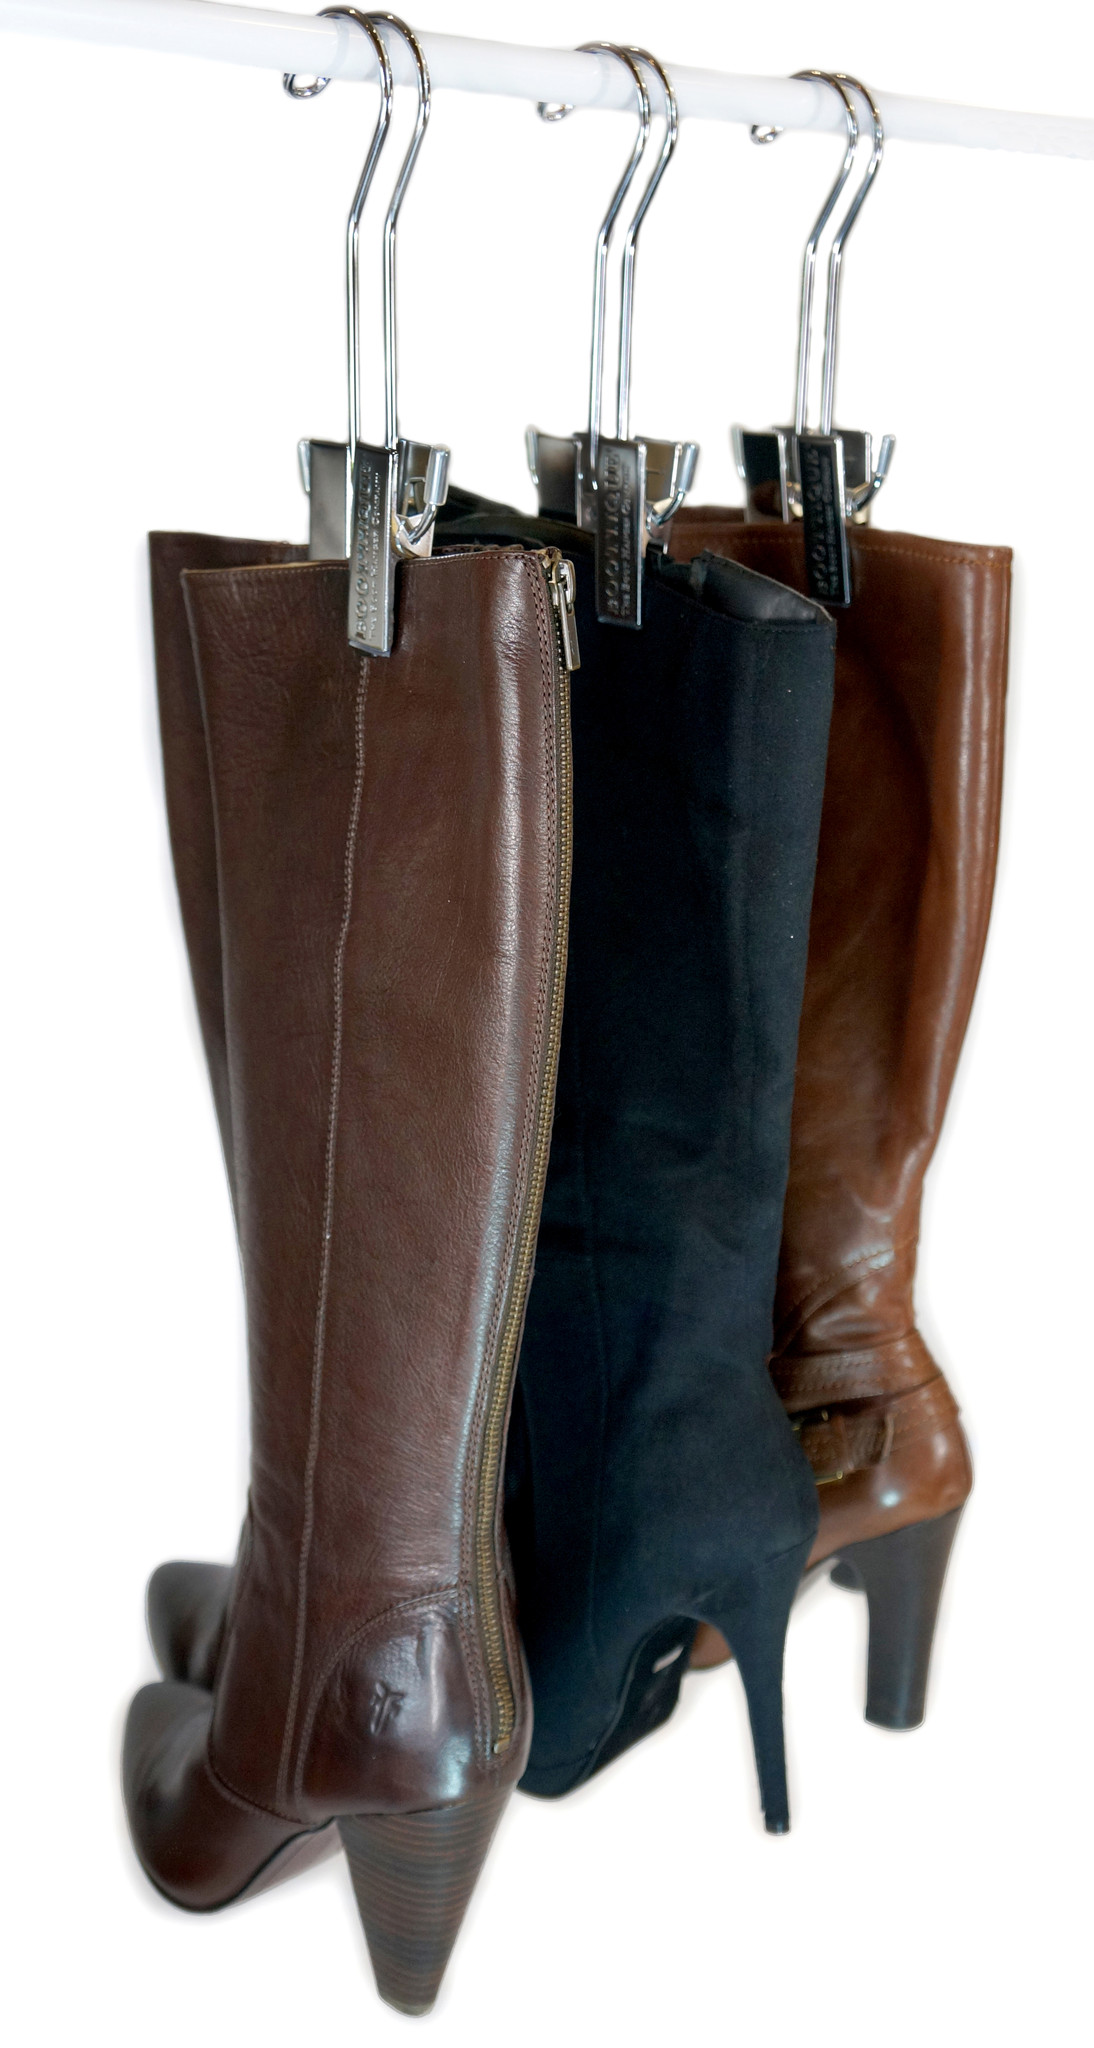 3 silver Bootique Boot Hangers are organizing 2 brown boots and 1 black boot on a closet rod.